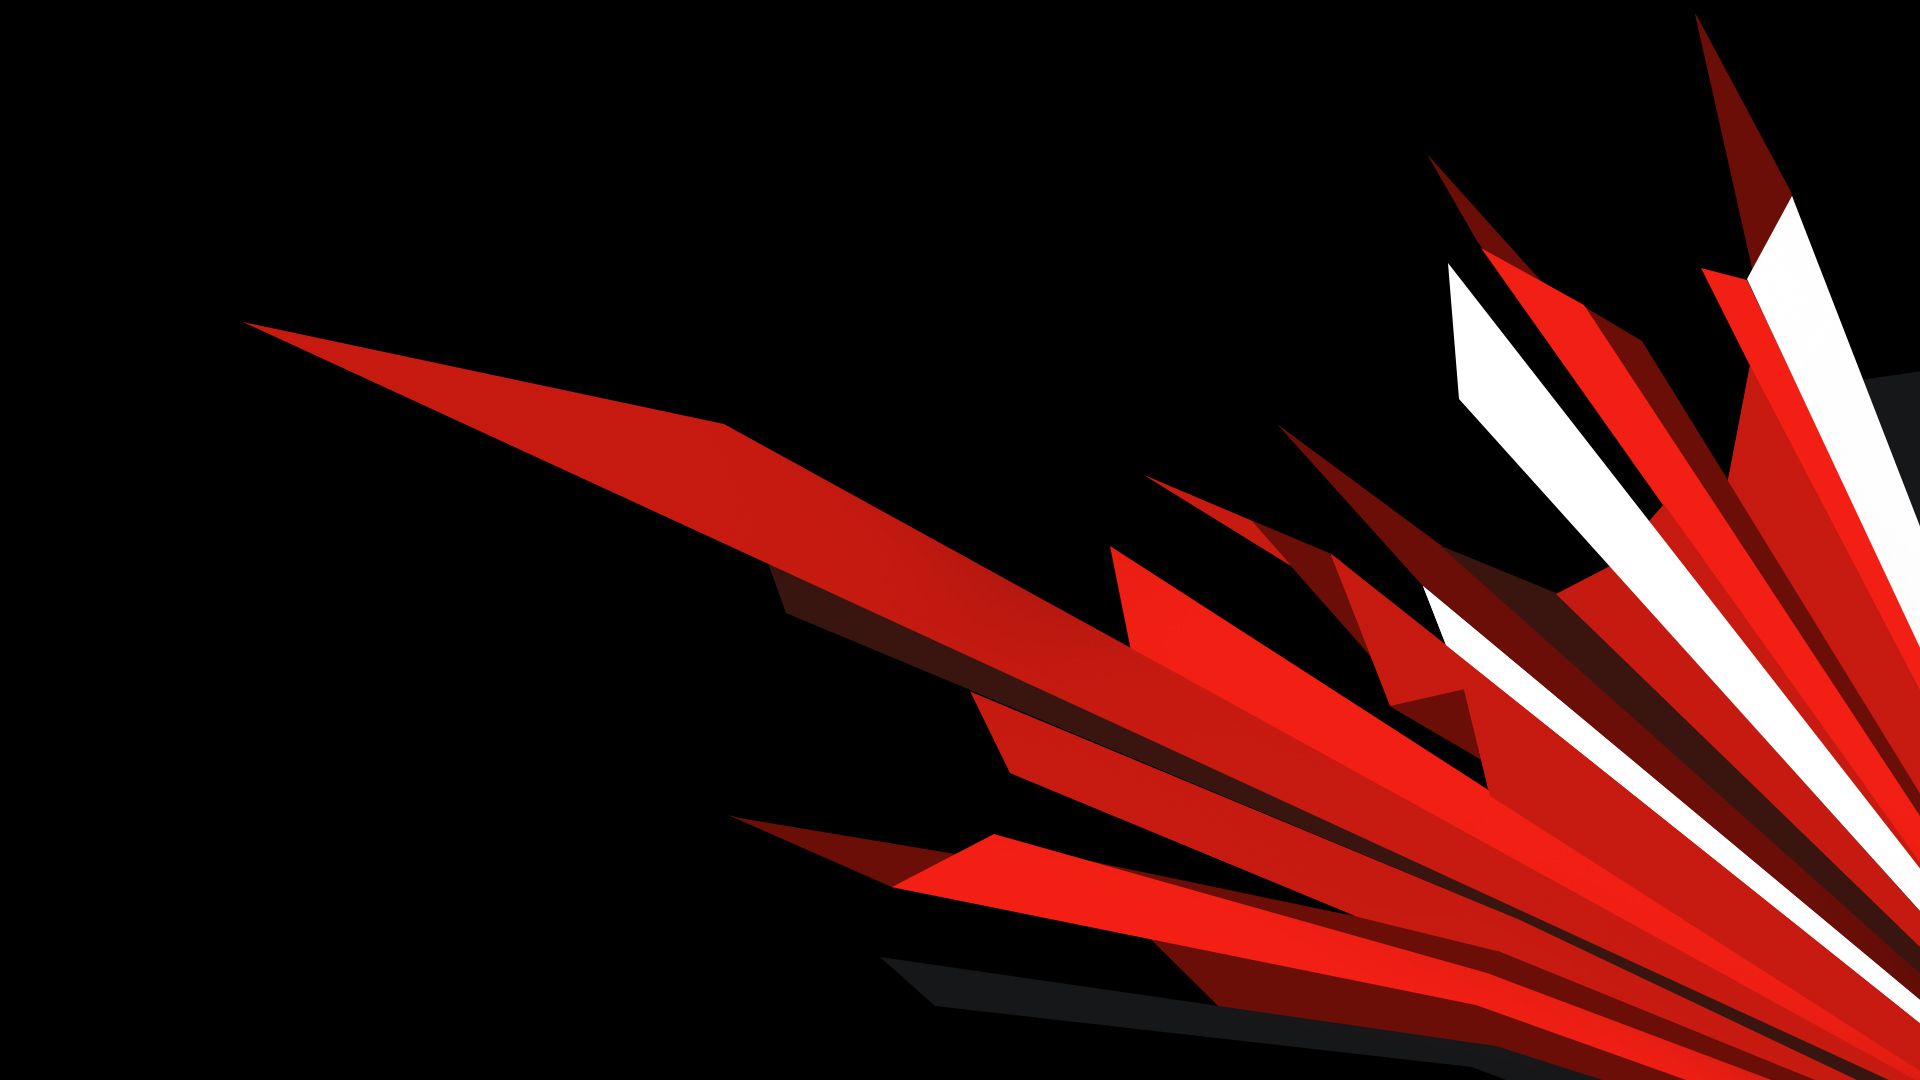 Red Abstract Gaming Wallpapers